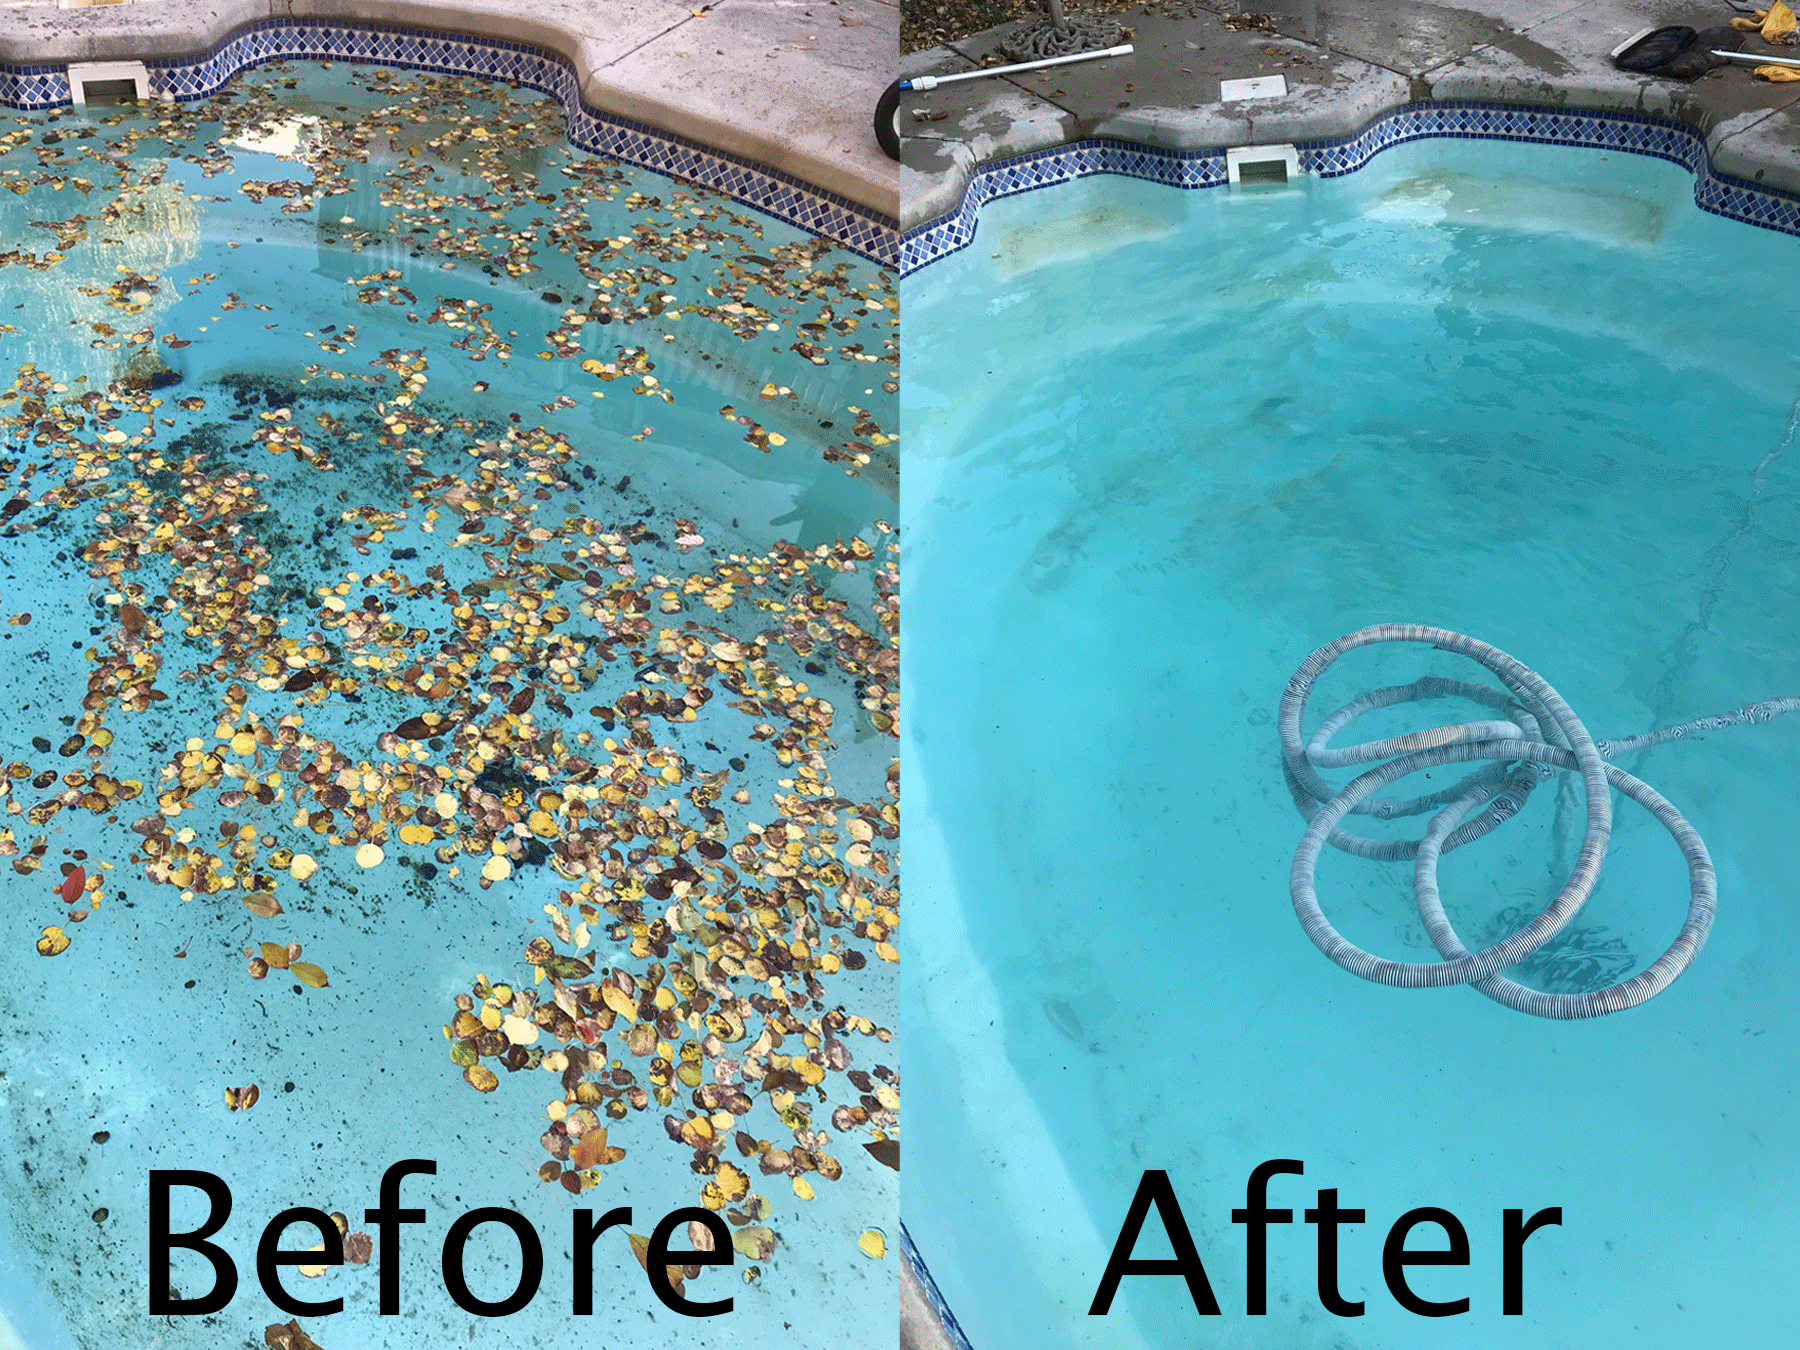 5 Star Pool Cleaning Before and After Clean Pool